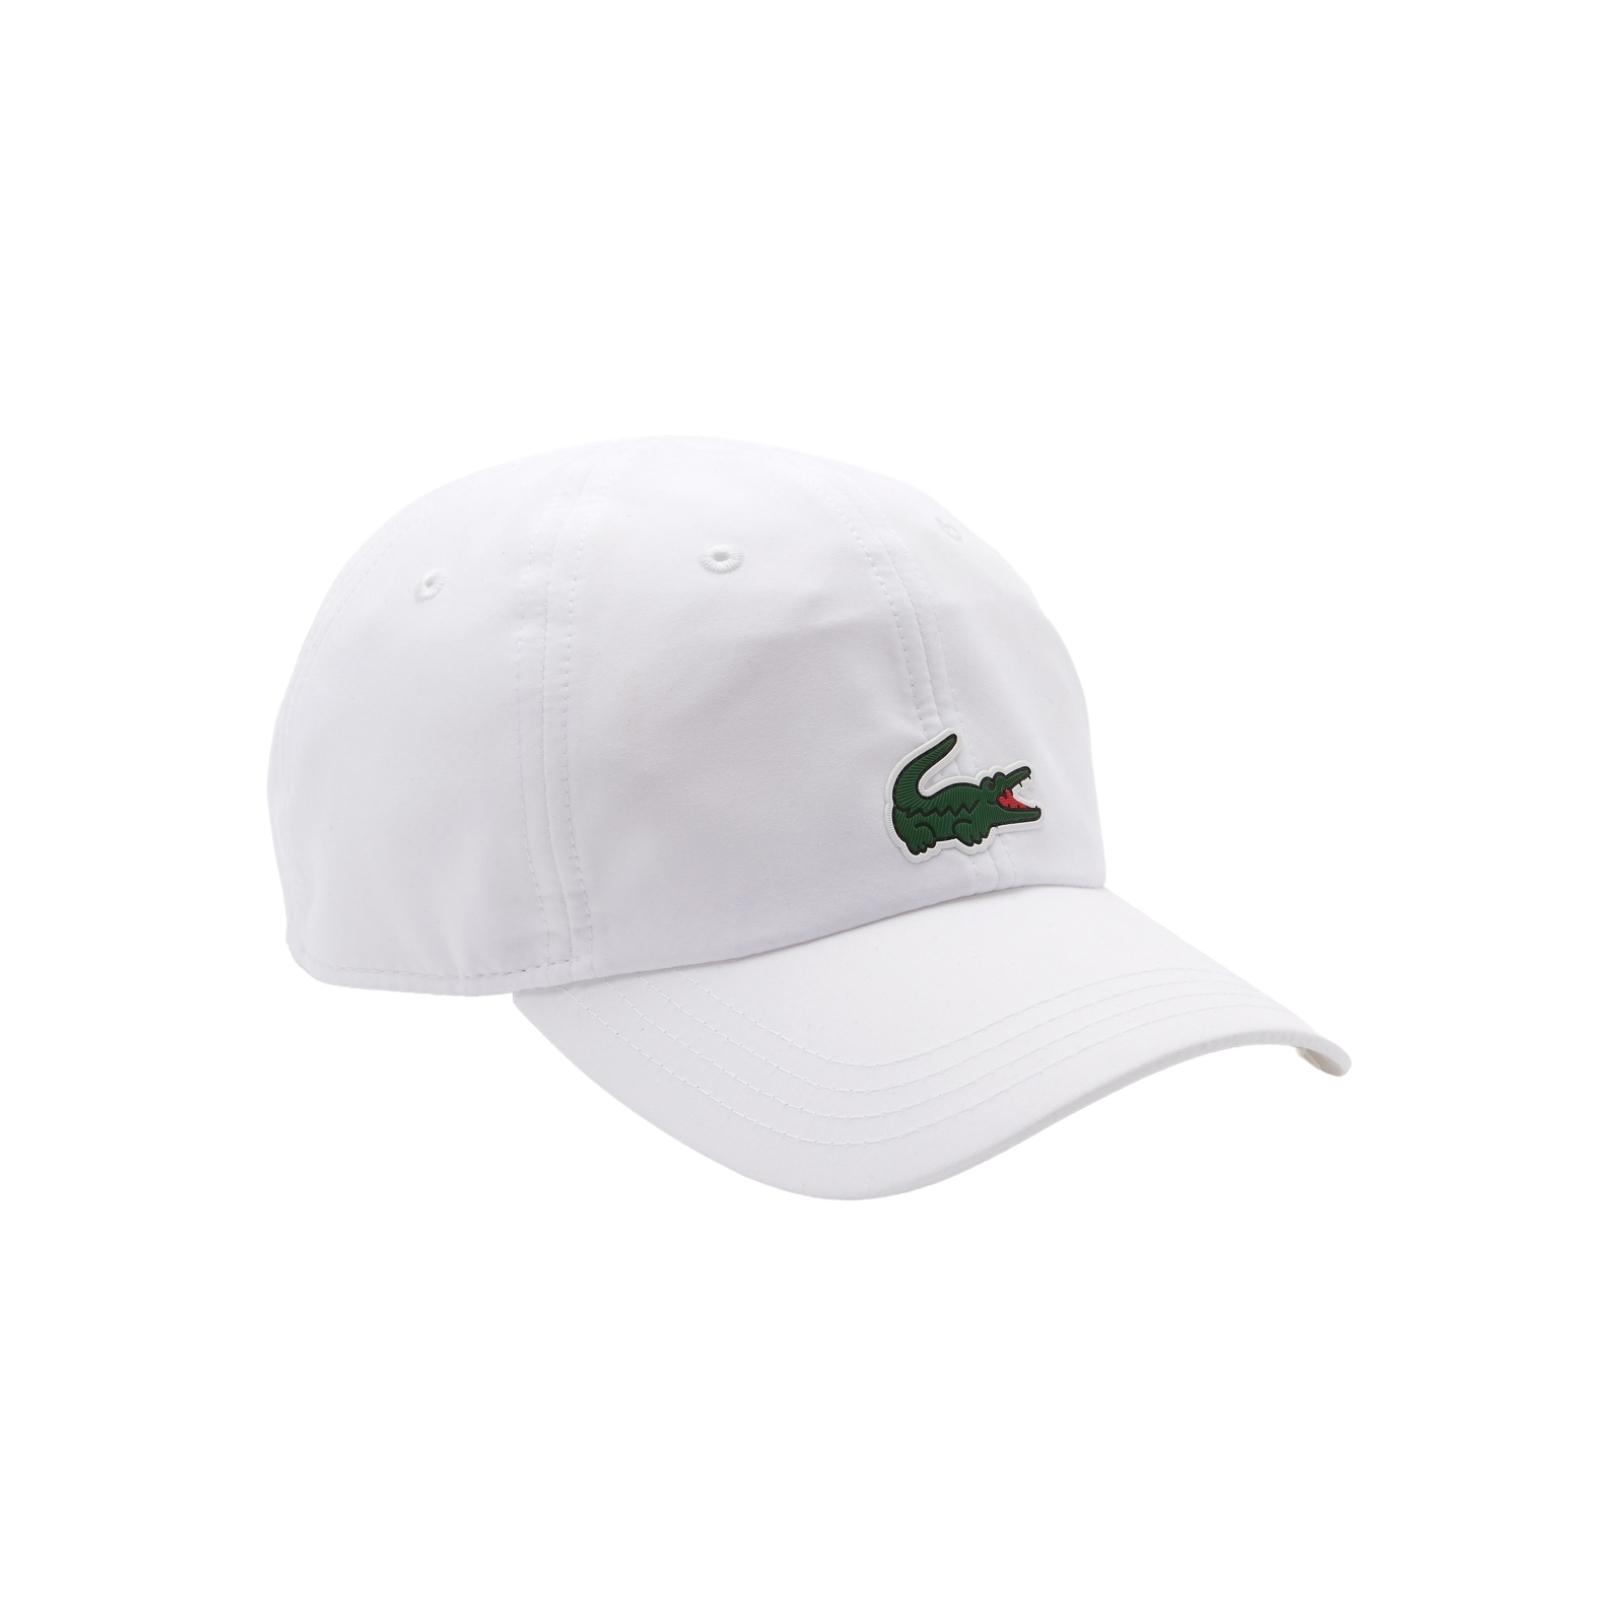 Scully grill tilfredshed Lacoste Sport Microfiber Cap White | Djoko Tennis Cap